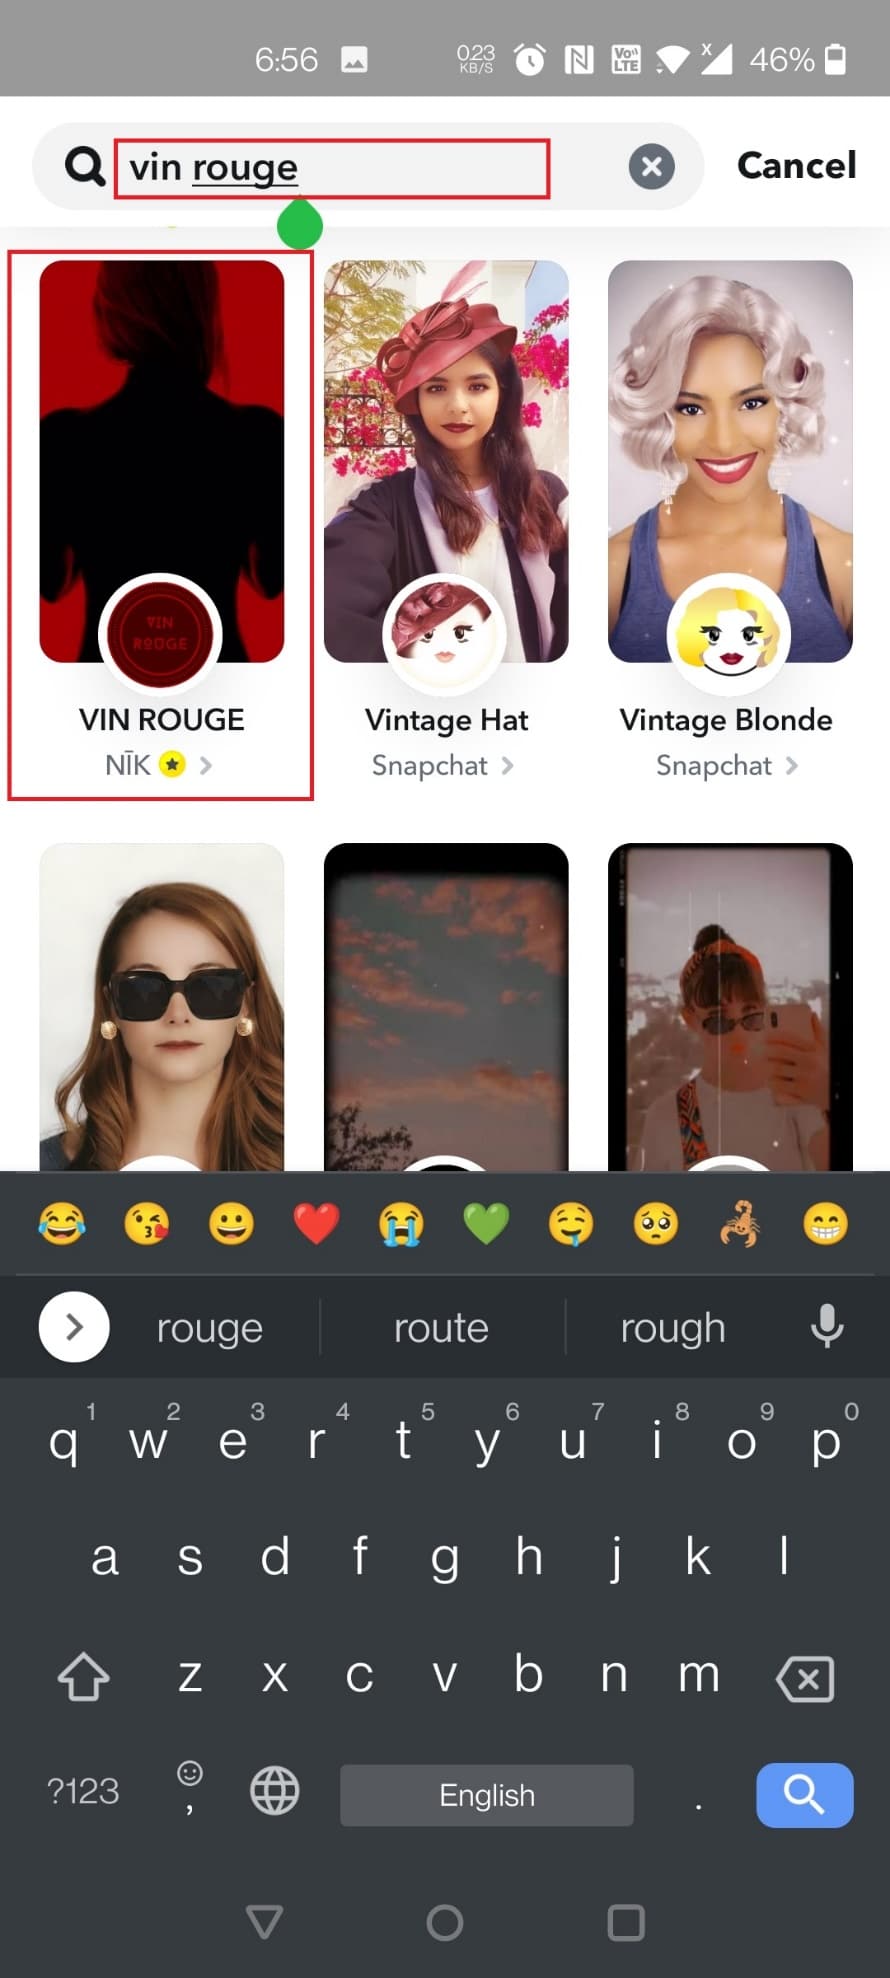 Type Vin Rouge in the search bar and tap on the desired result